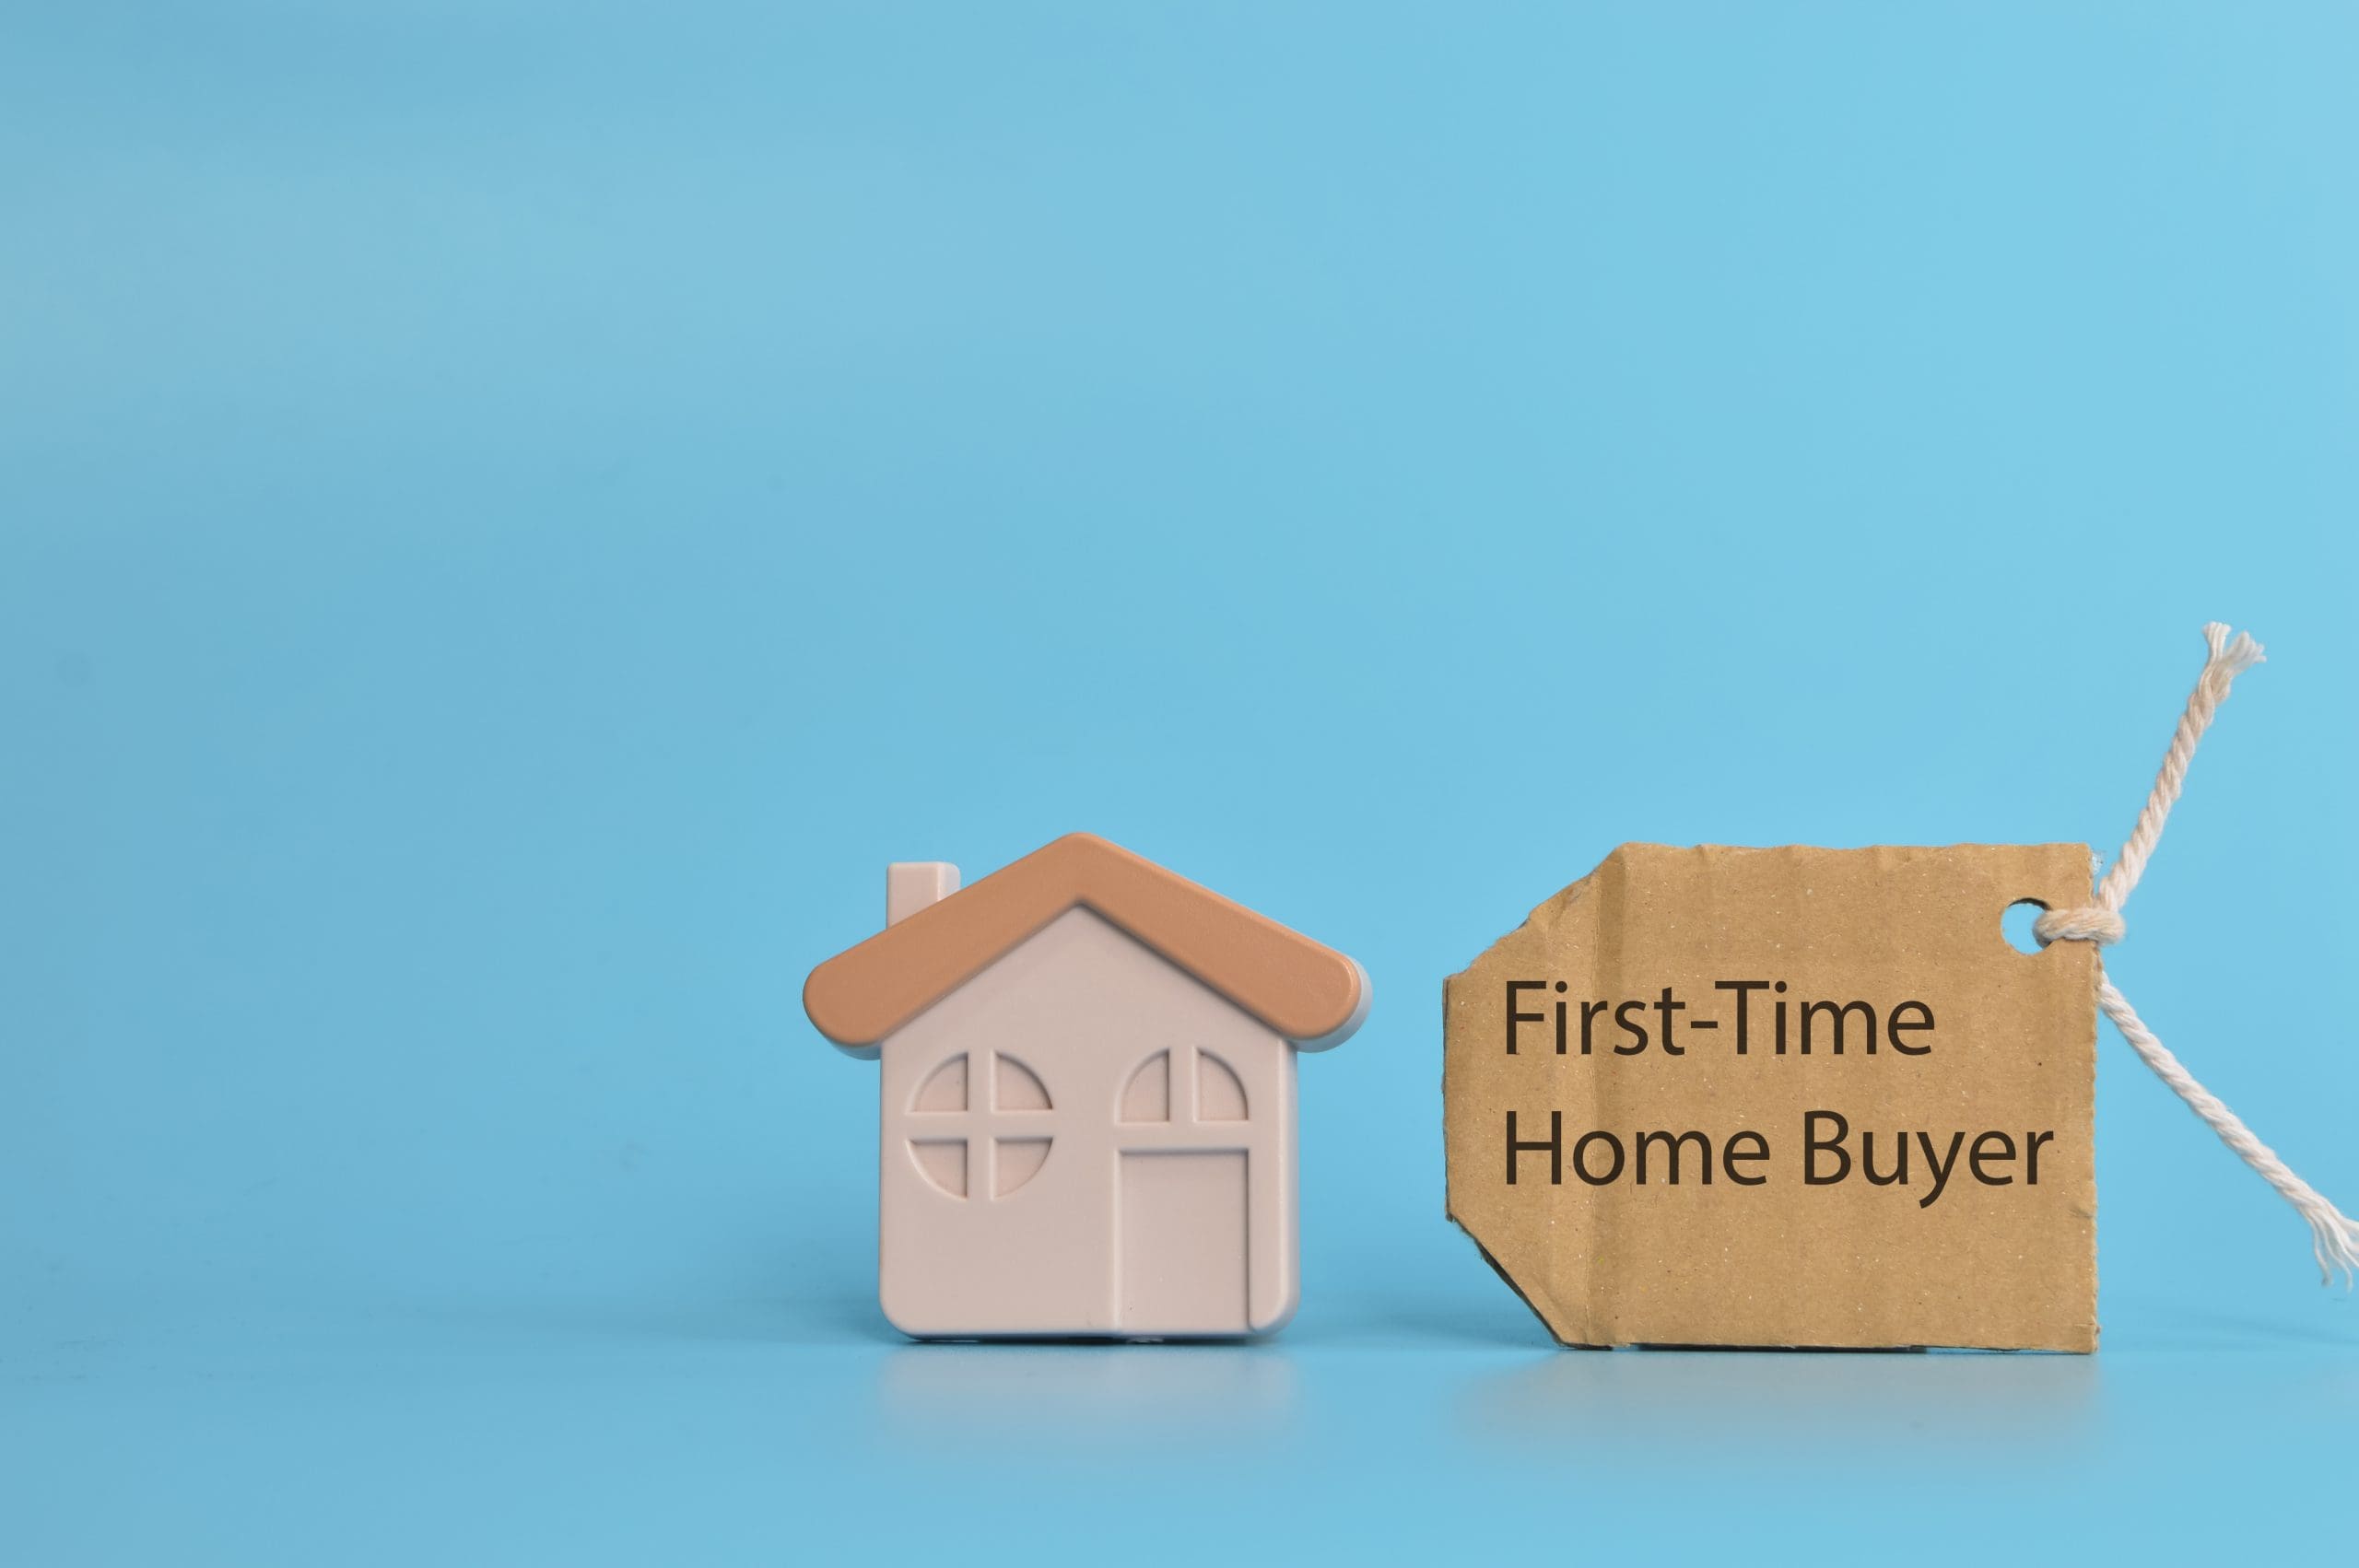 First-Time Home Buyers: 10 Essential Tips for a Successful Home Purchase